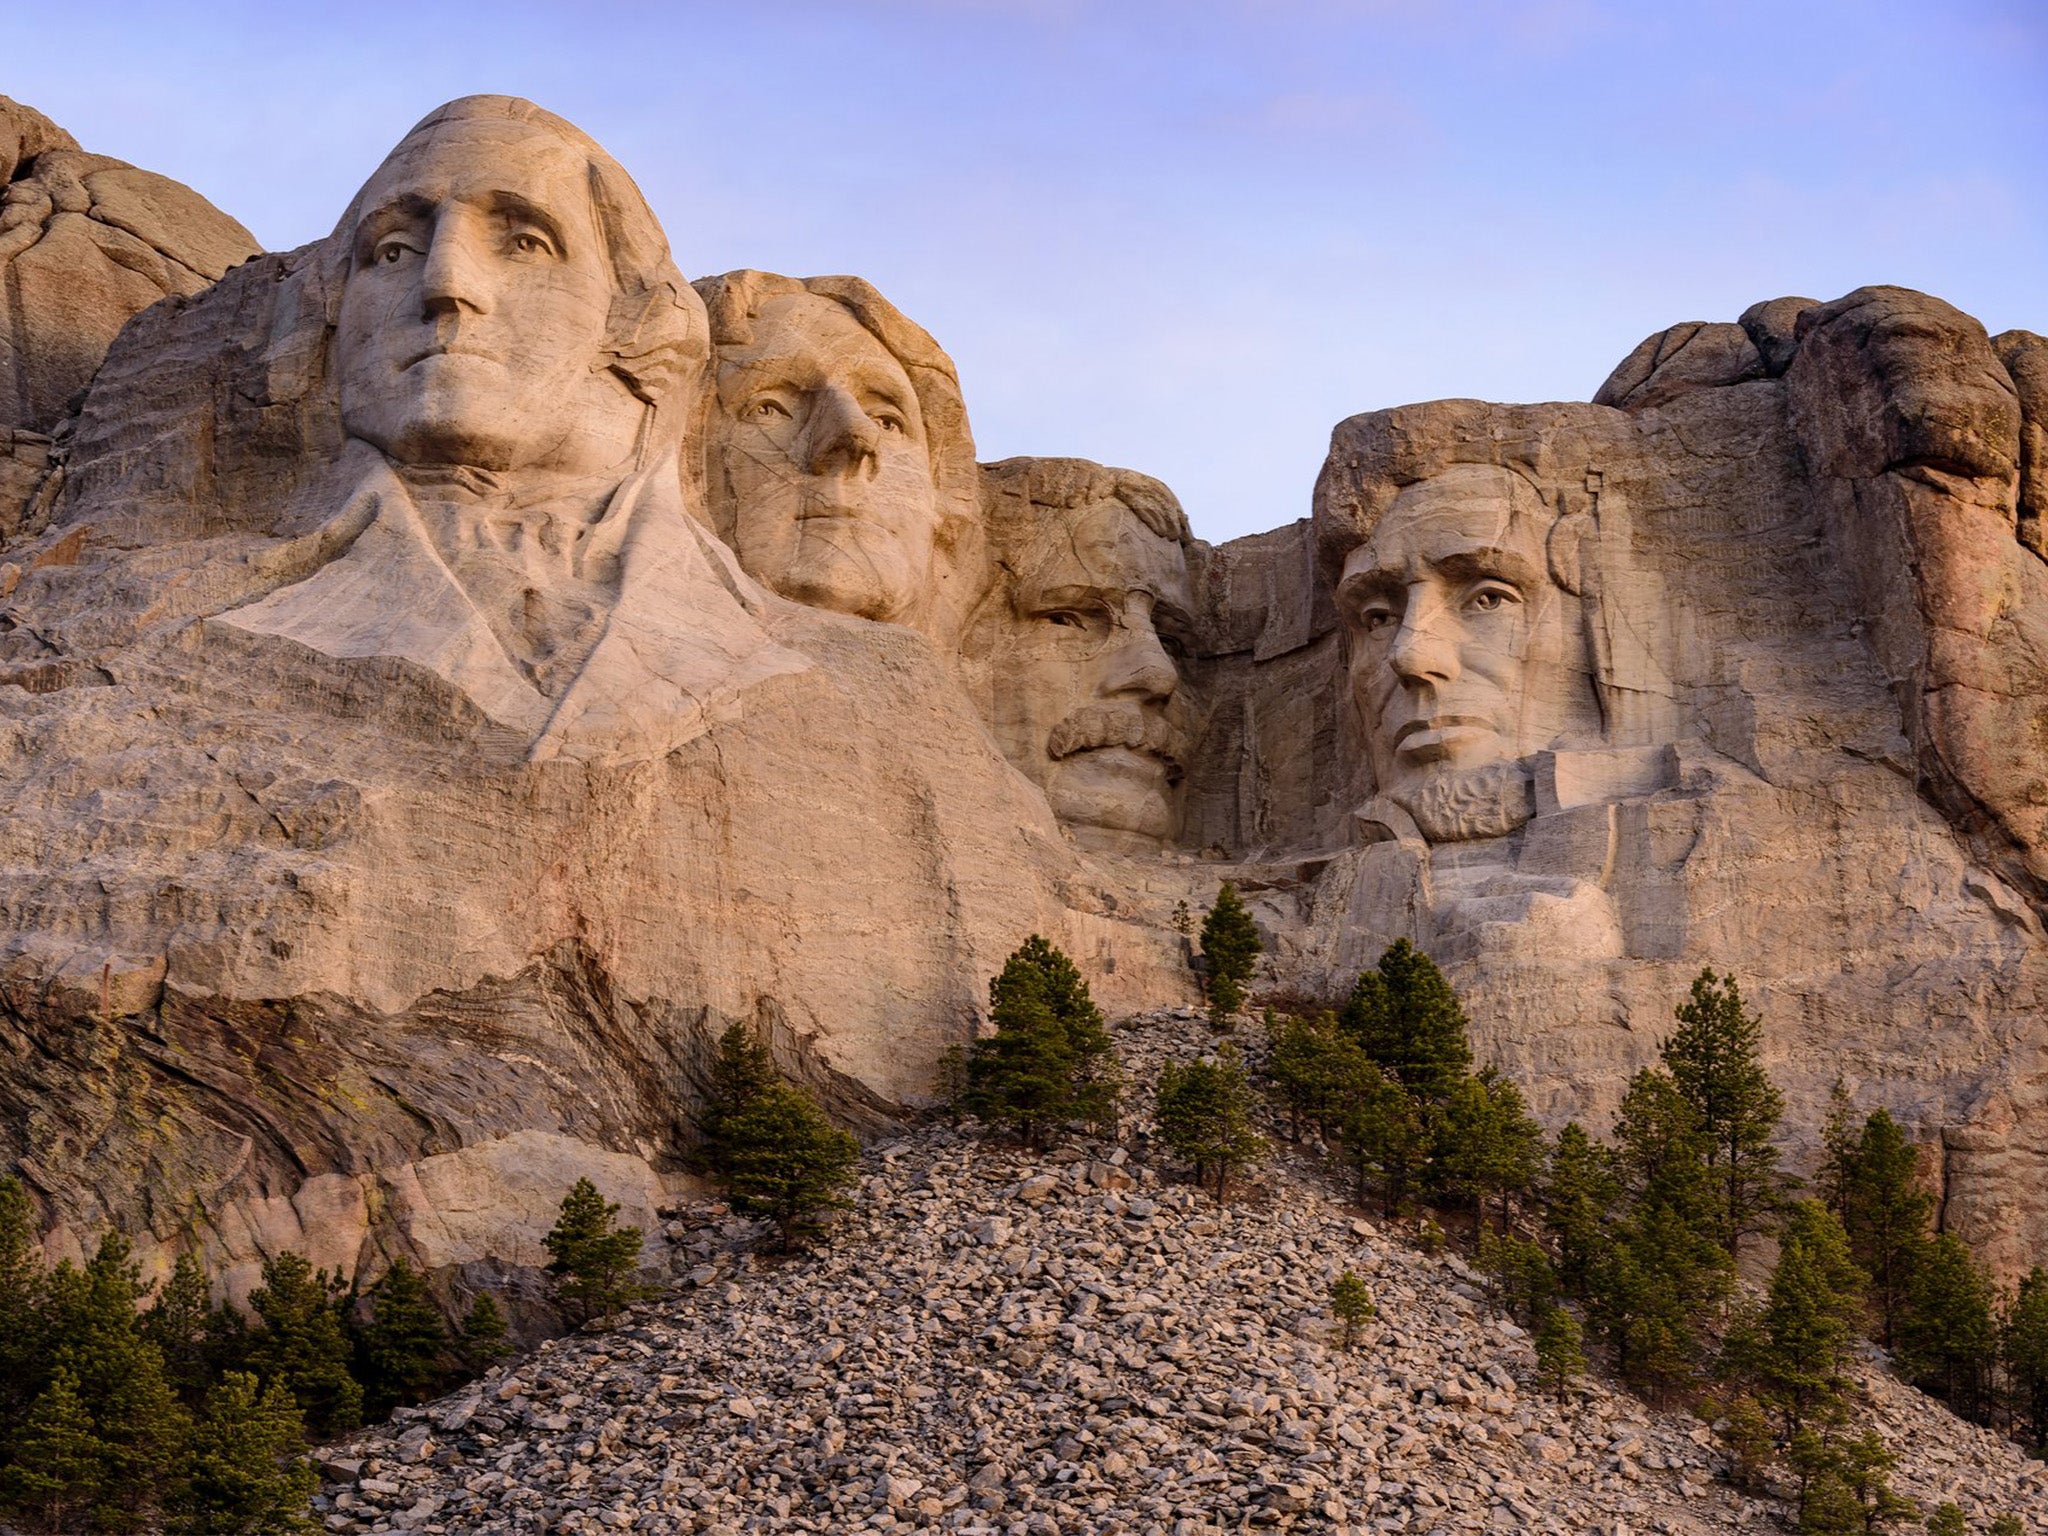 Mount Rushmore is an imposing sight